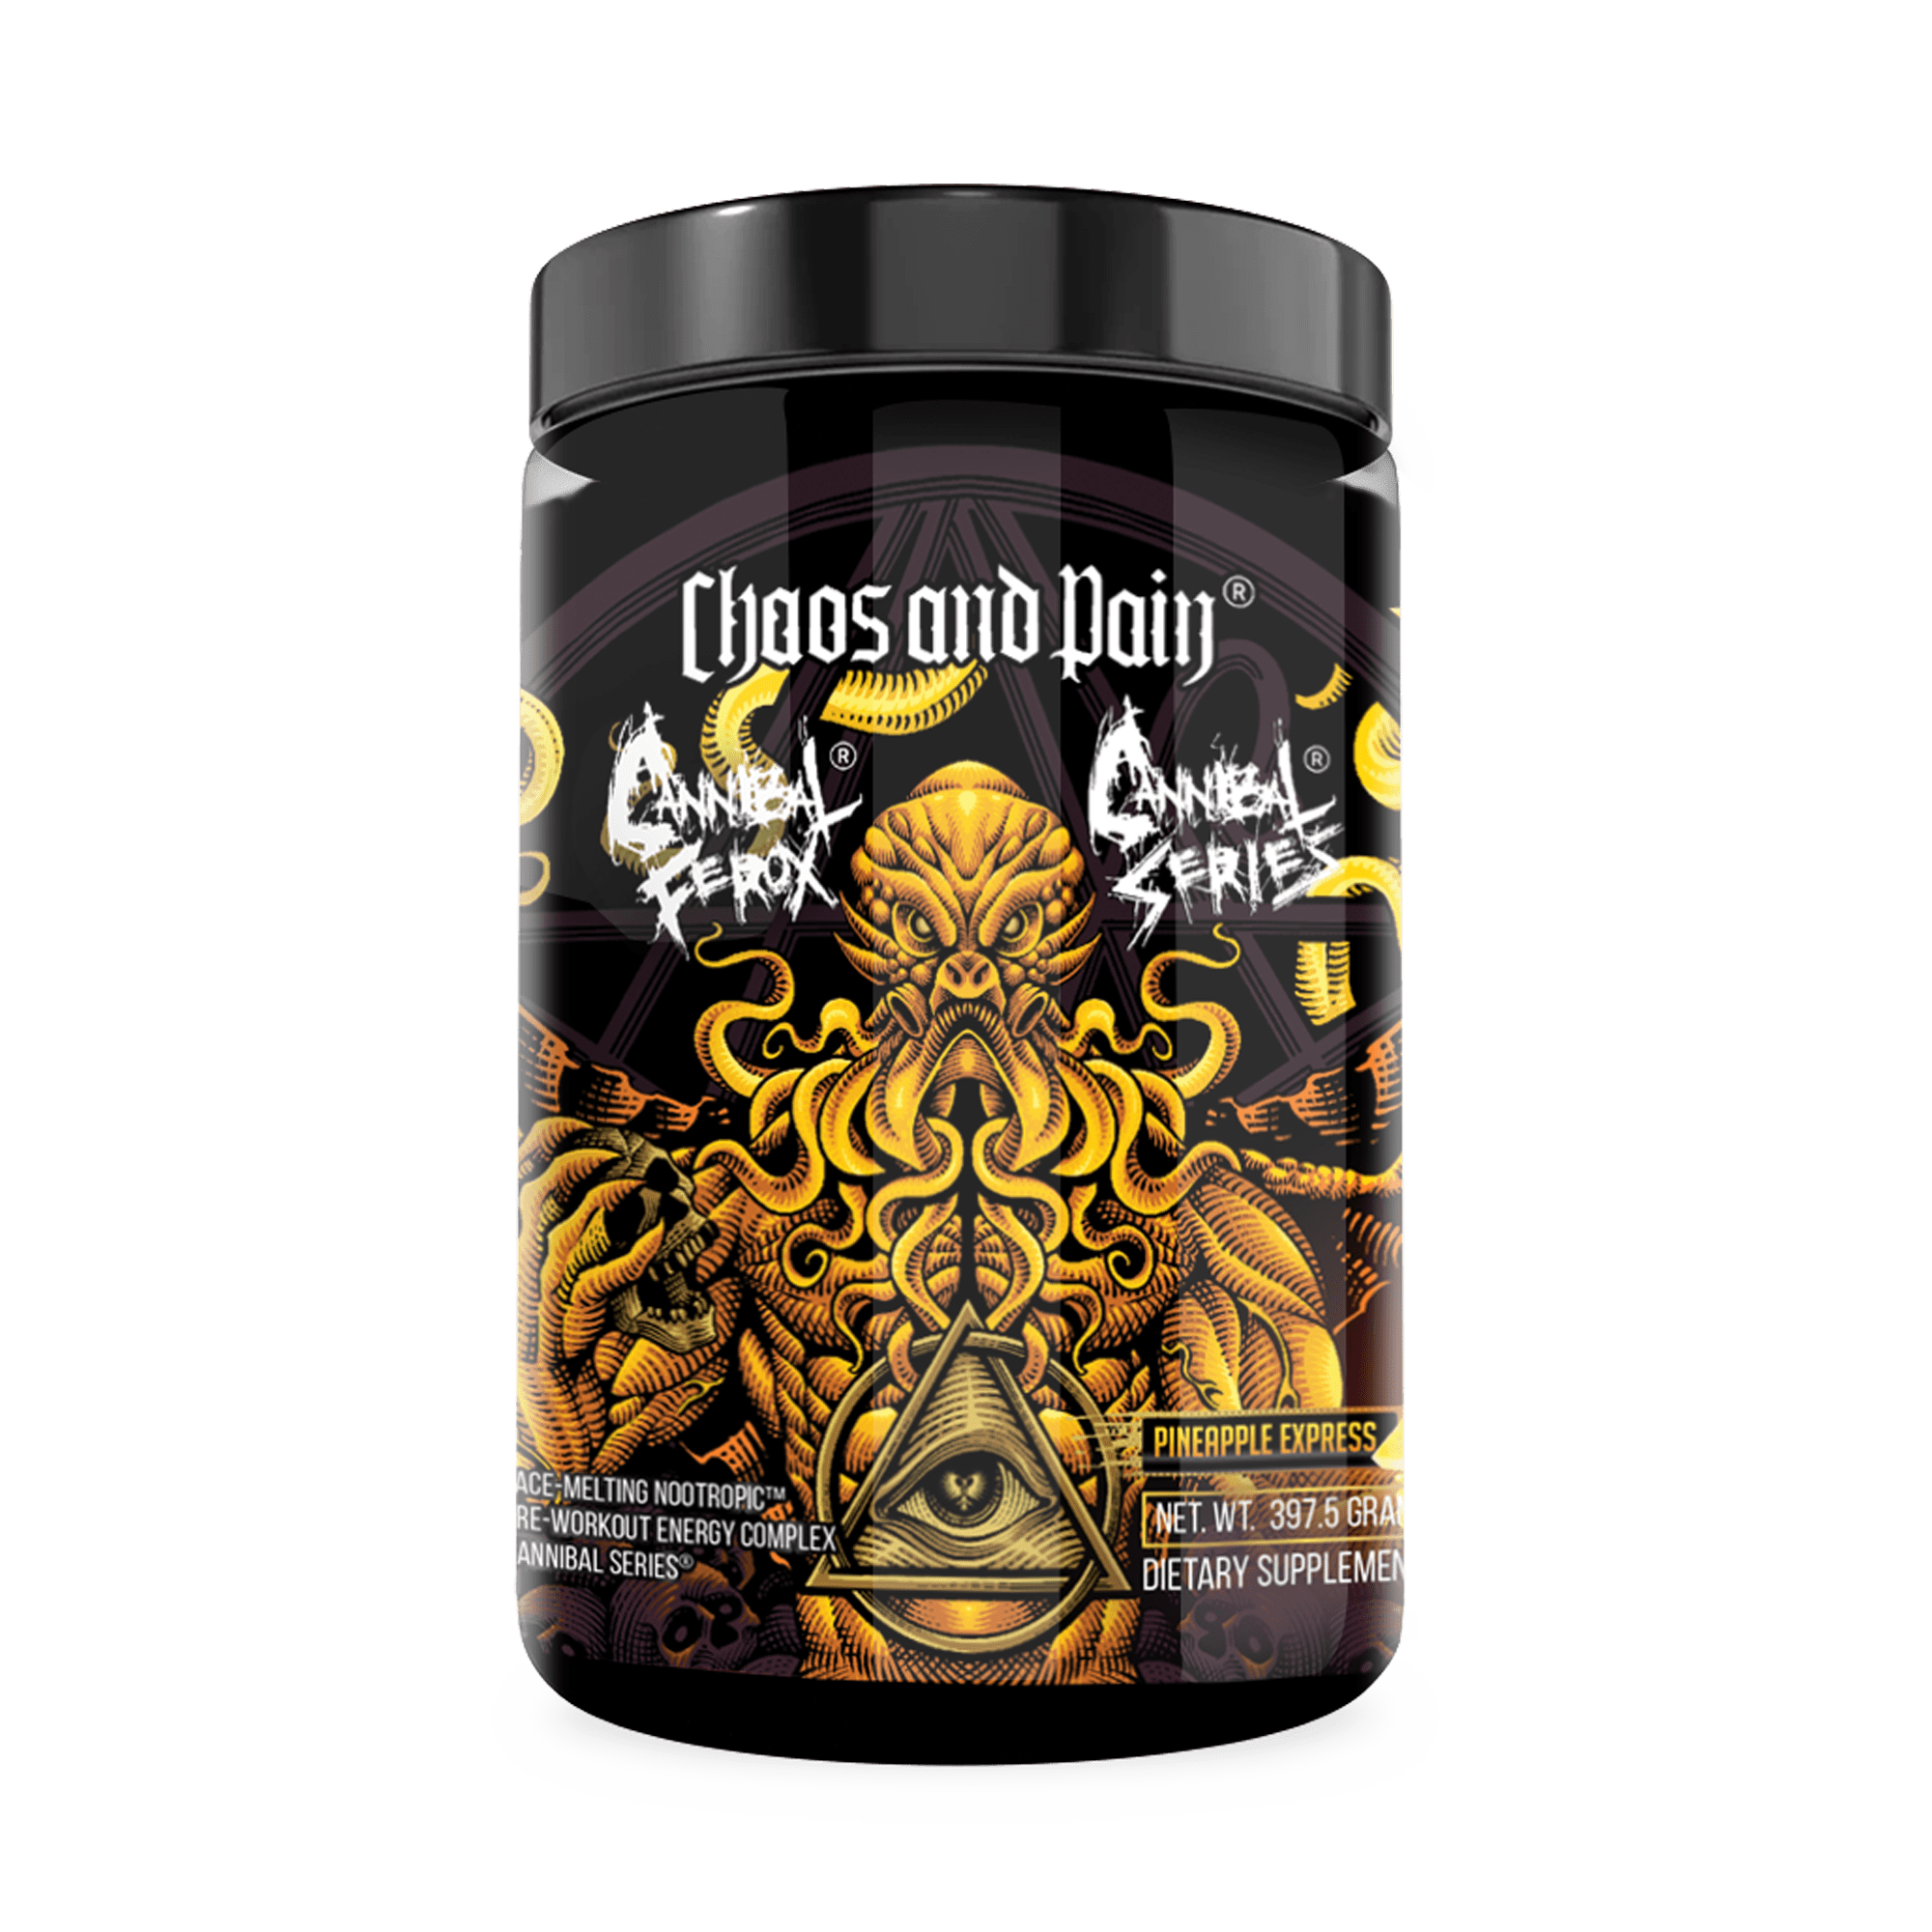 cnp best selling flavor new pineapple